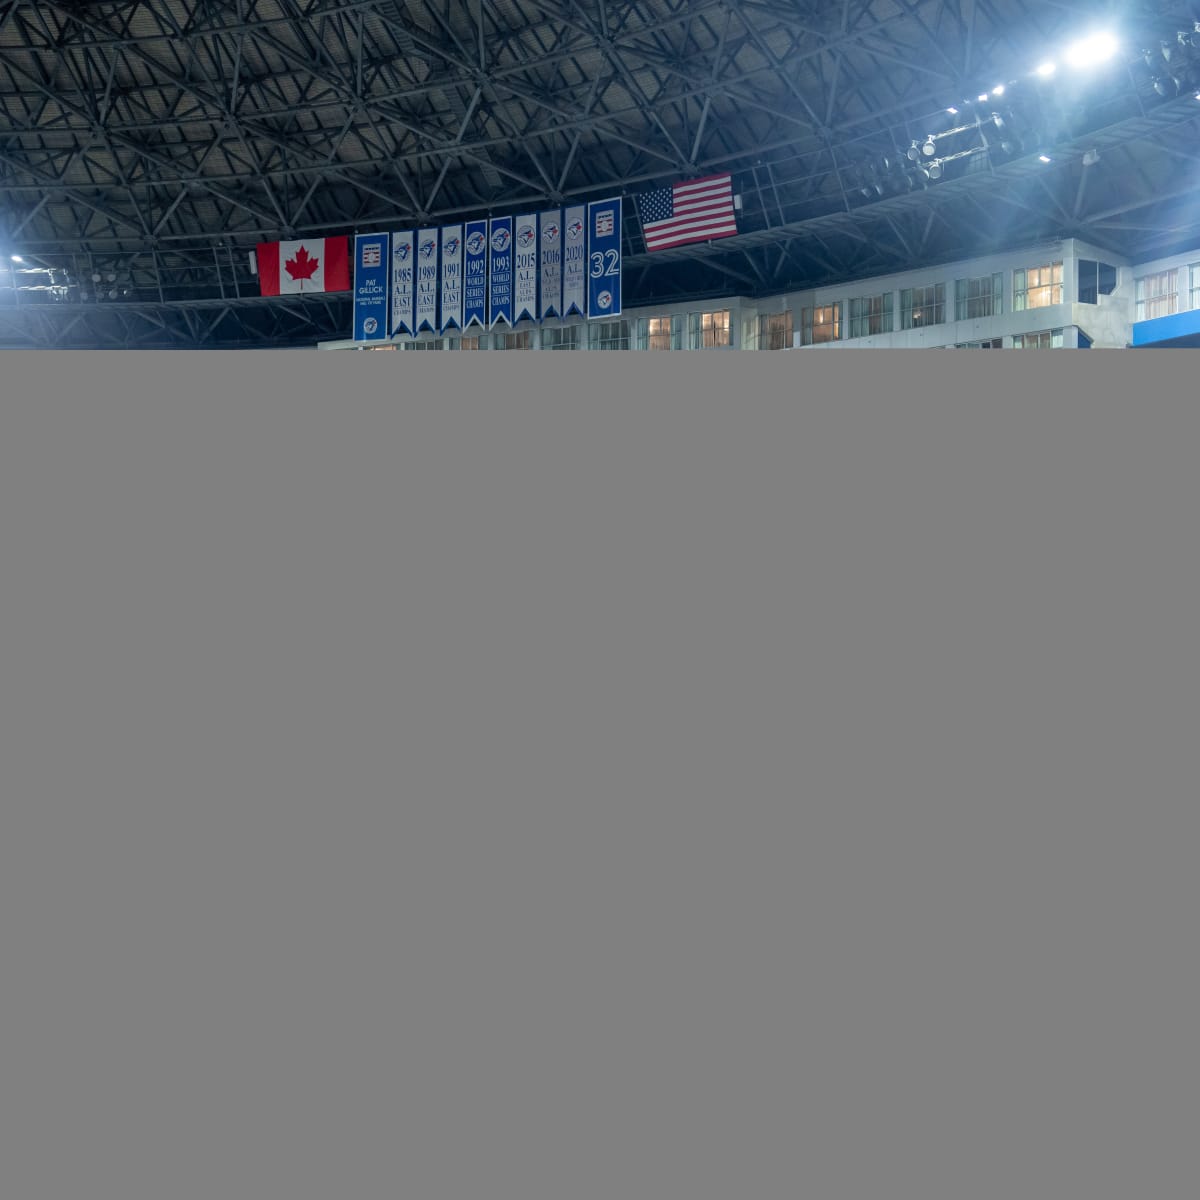 Blue Jays Announce Rogers Centre's New Outfield Dimensions - MLB